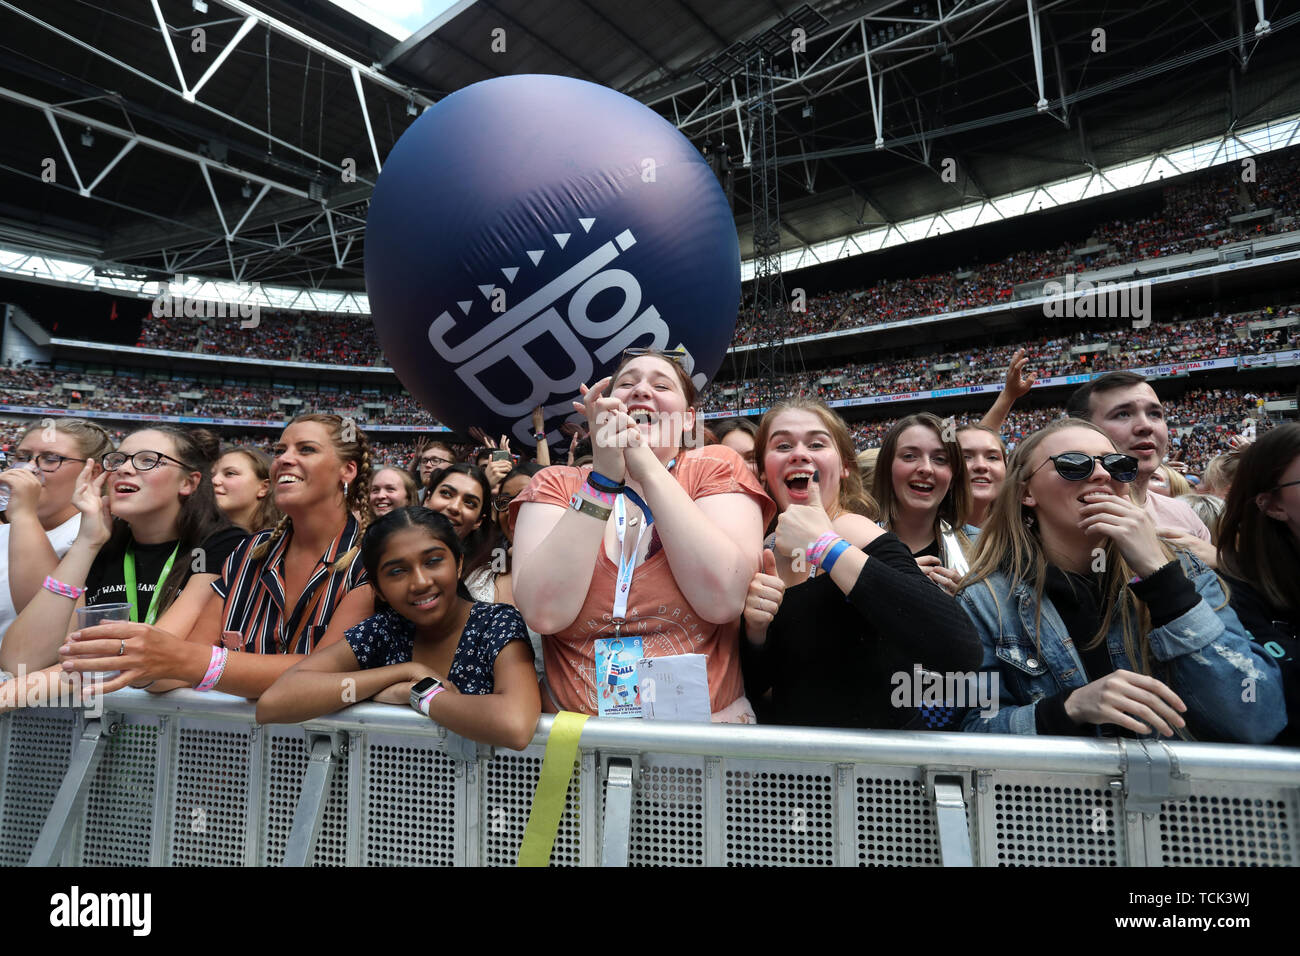 A Jonas Blue ball in the crowd during Capital's Summertime Ball. The world's biggest stars perform live for 80,000 Capital listeners at Wembley Stadium at the UK's biggest summer party. Stock Photo